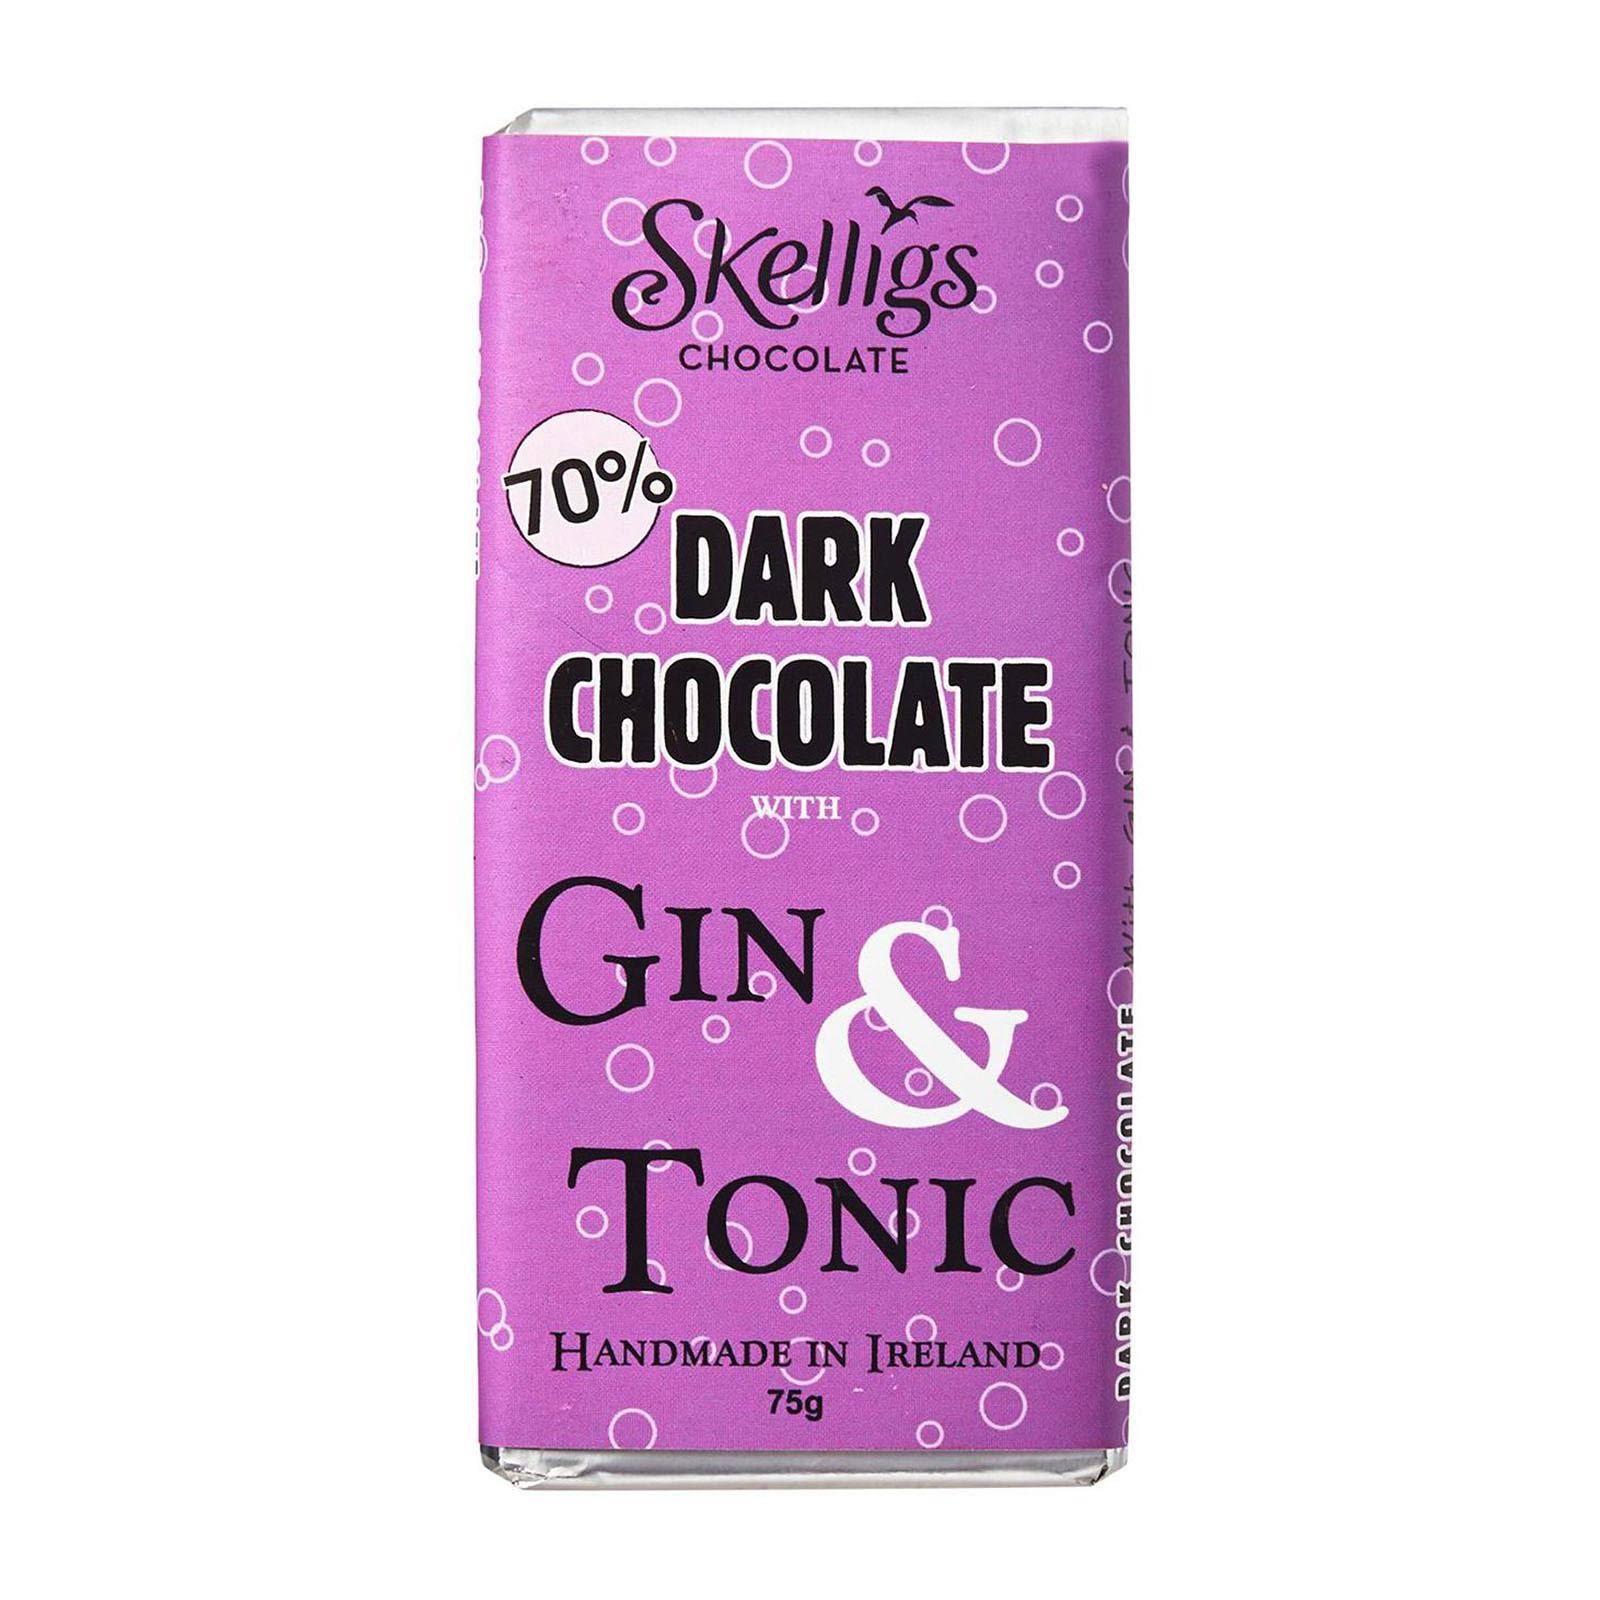 Skelligs Chocolate Co. Gin and Tonic Chocolate Bar